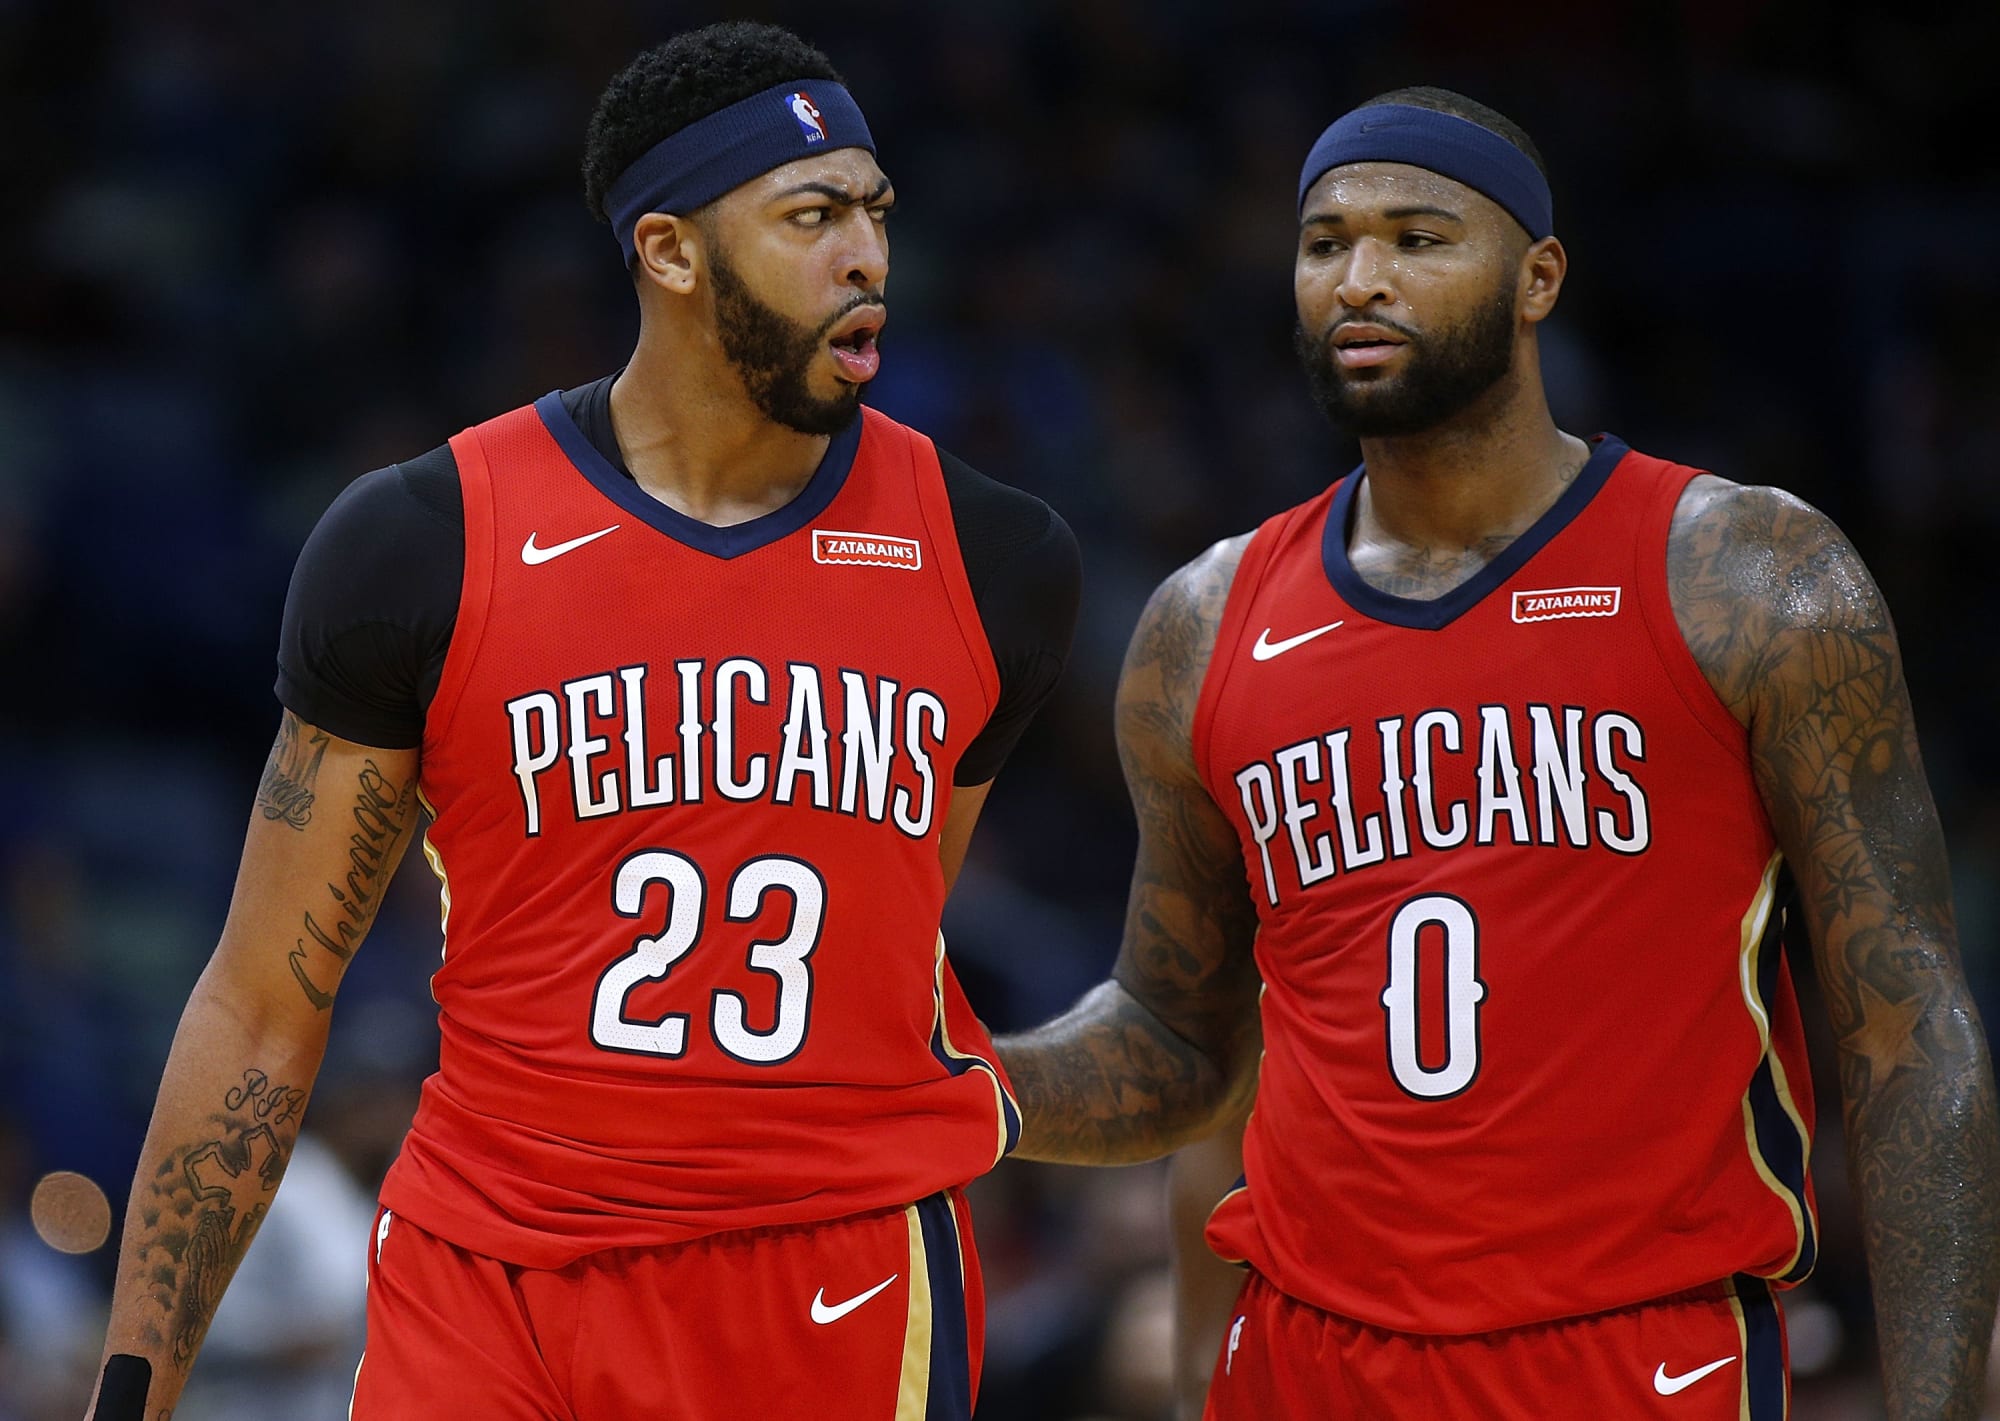 DeMarcus Cousins and Anthony Davis team up for a hilarious Boogie and Brow  edition of 'Who's who?' - Article - Bardown